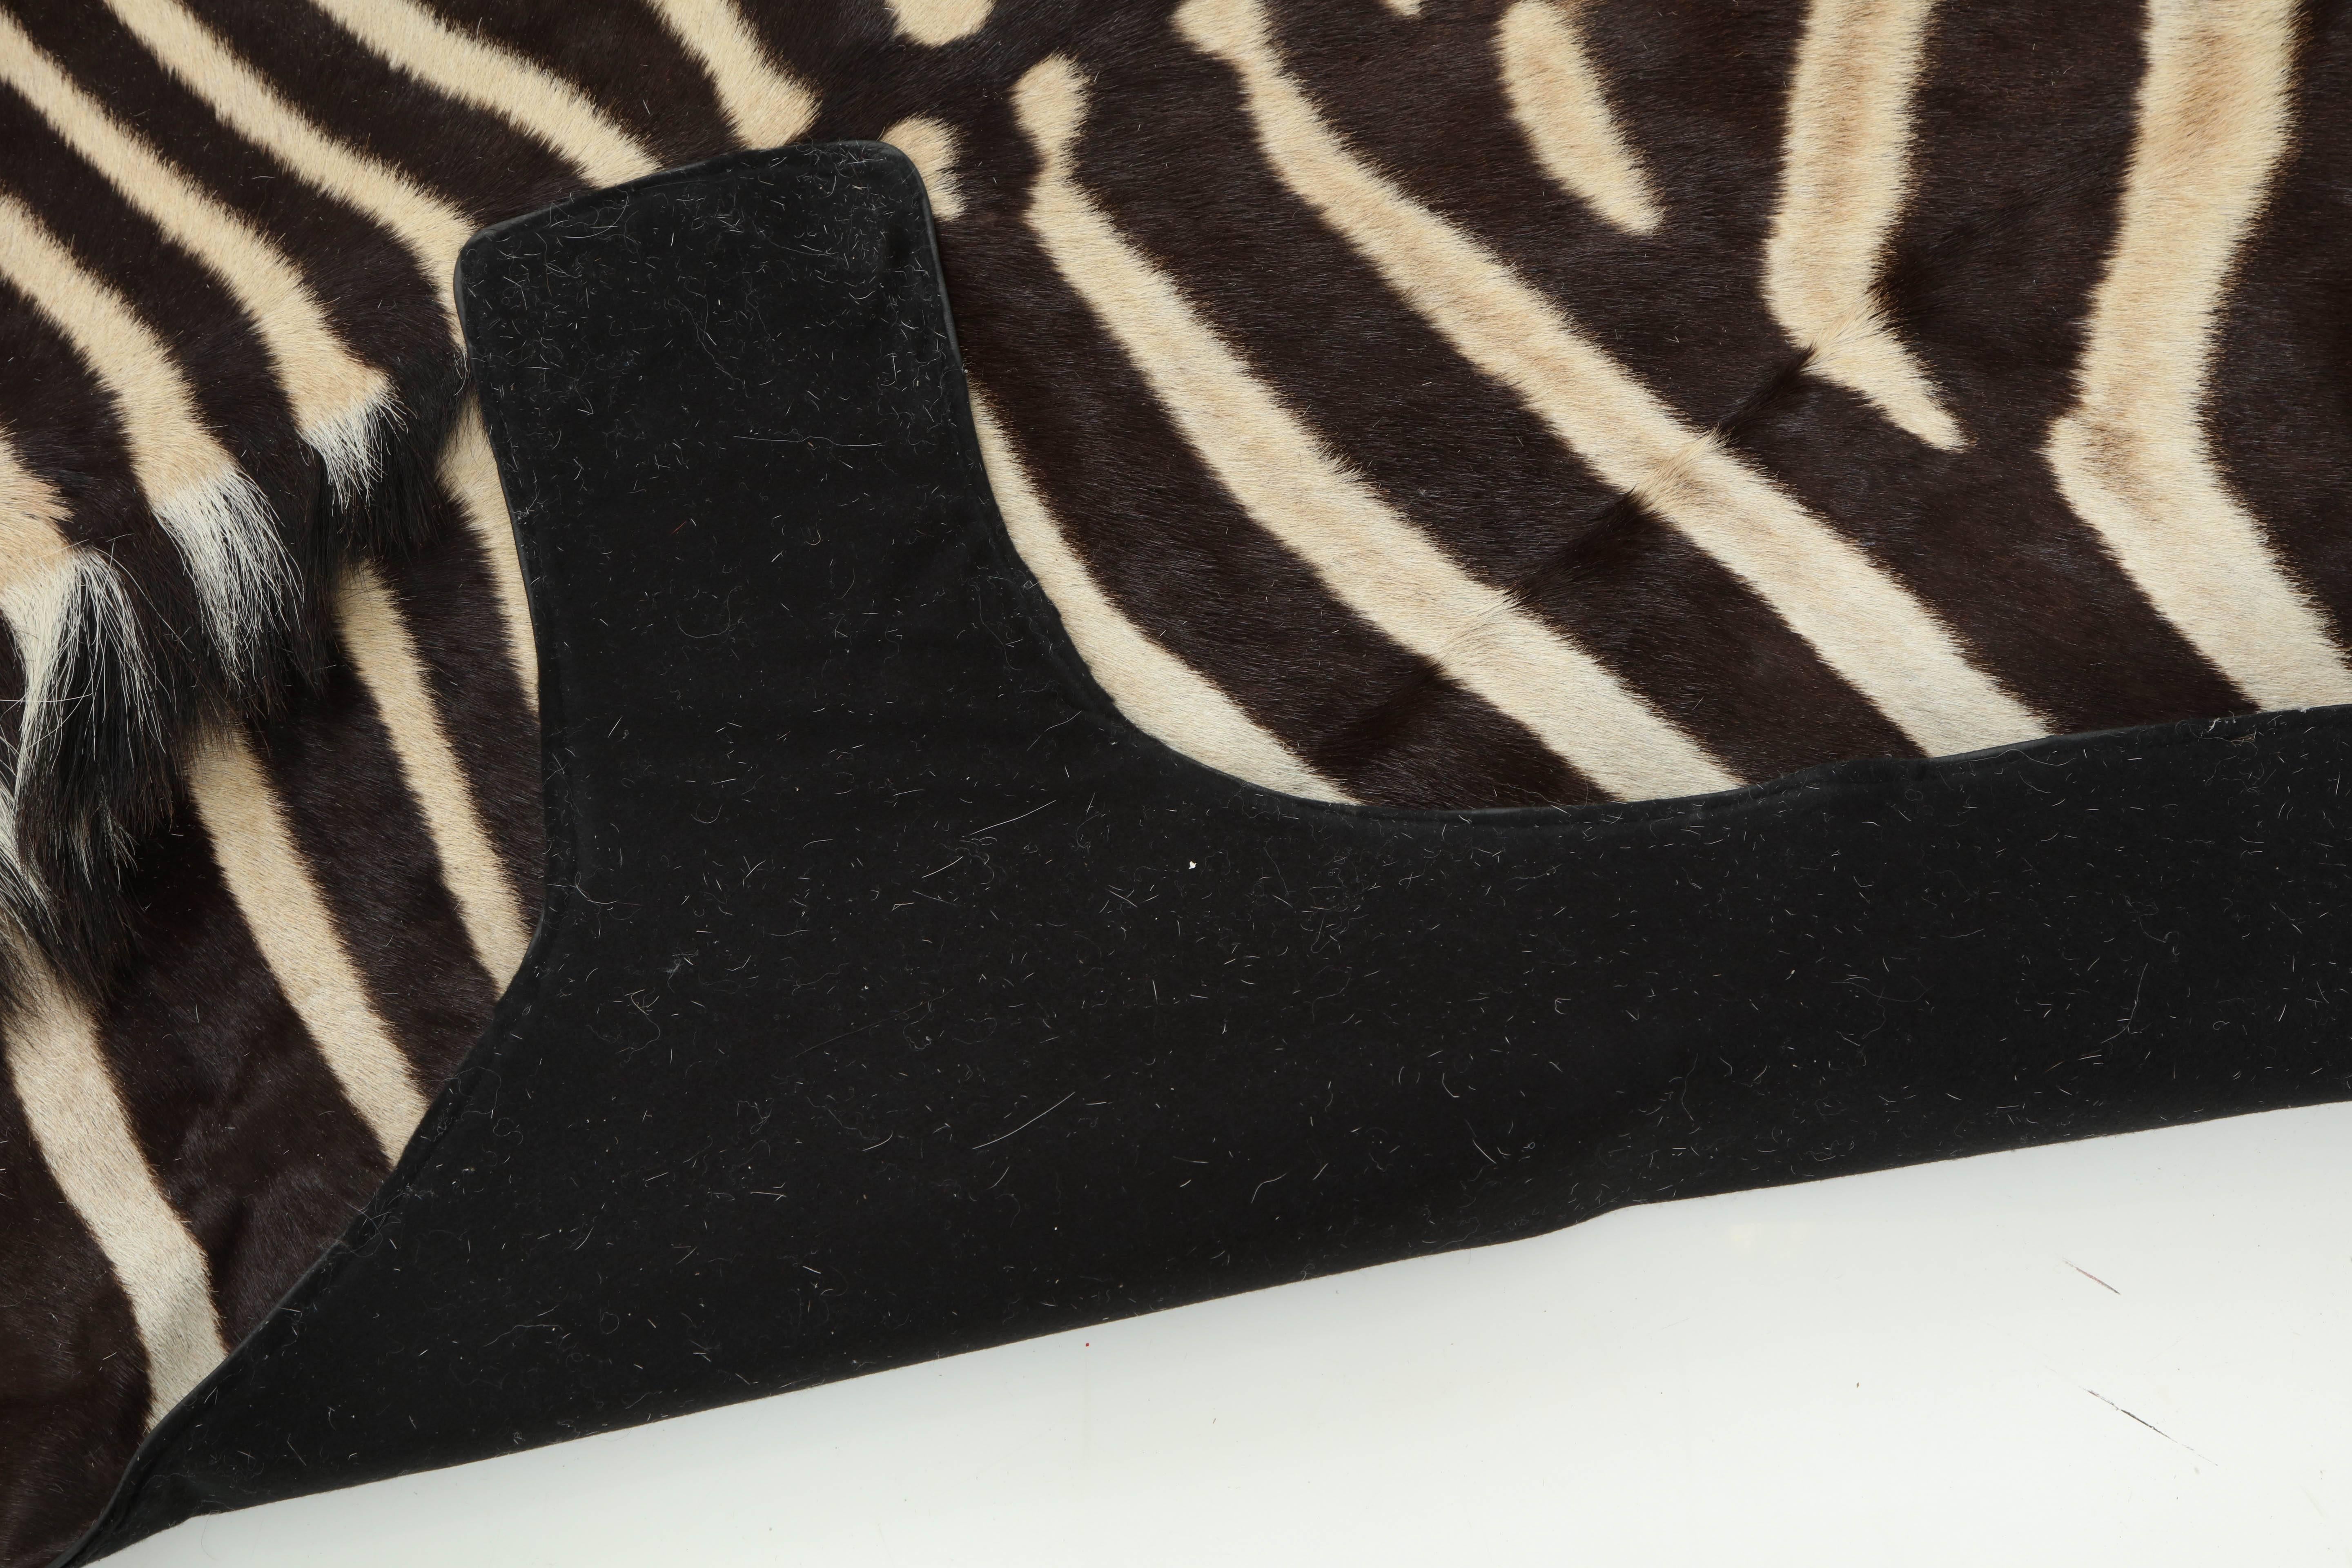 Contemporary Rug, Zebra Hide, Backed with Leather Trim